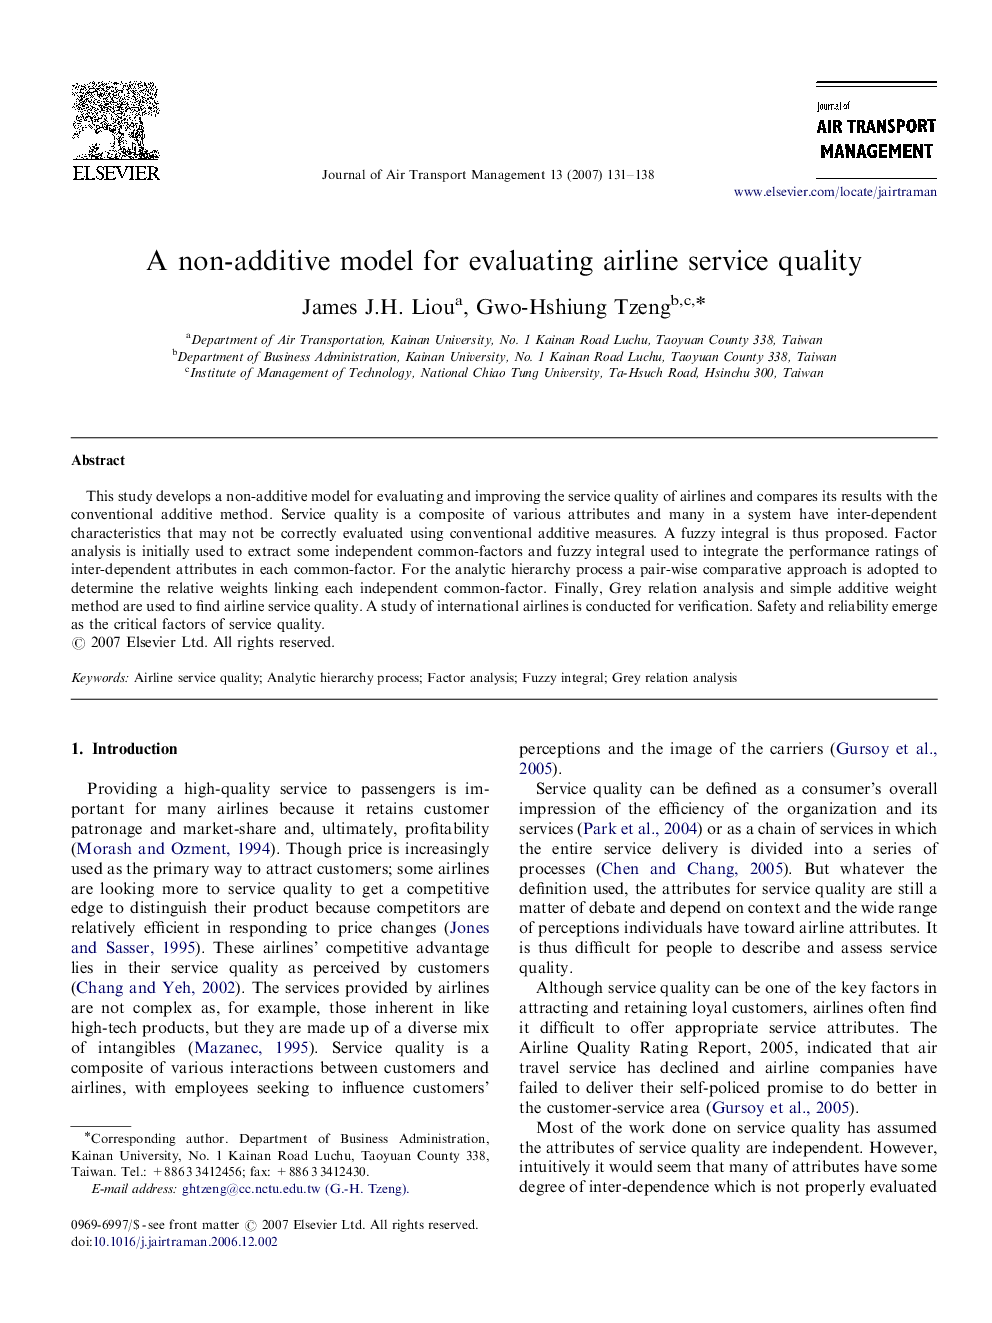 A non-additive model for evaluating airline service quality